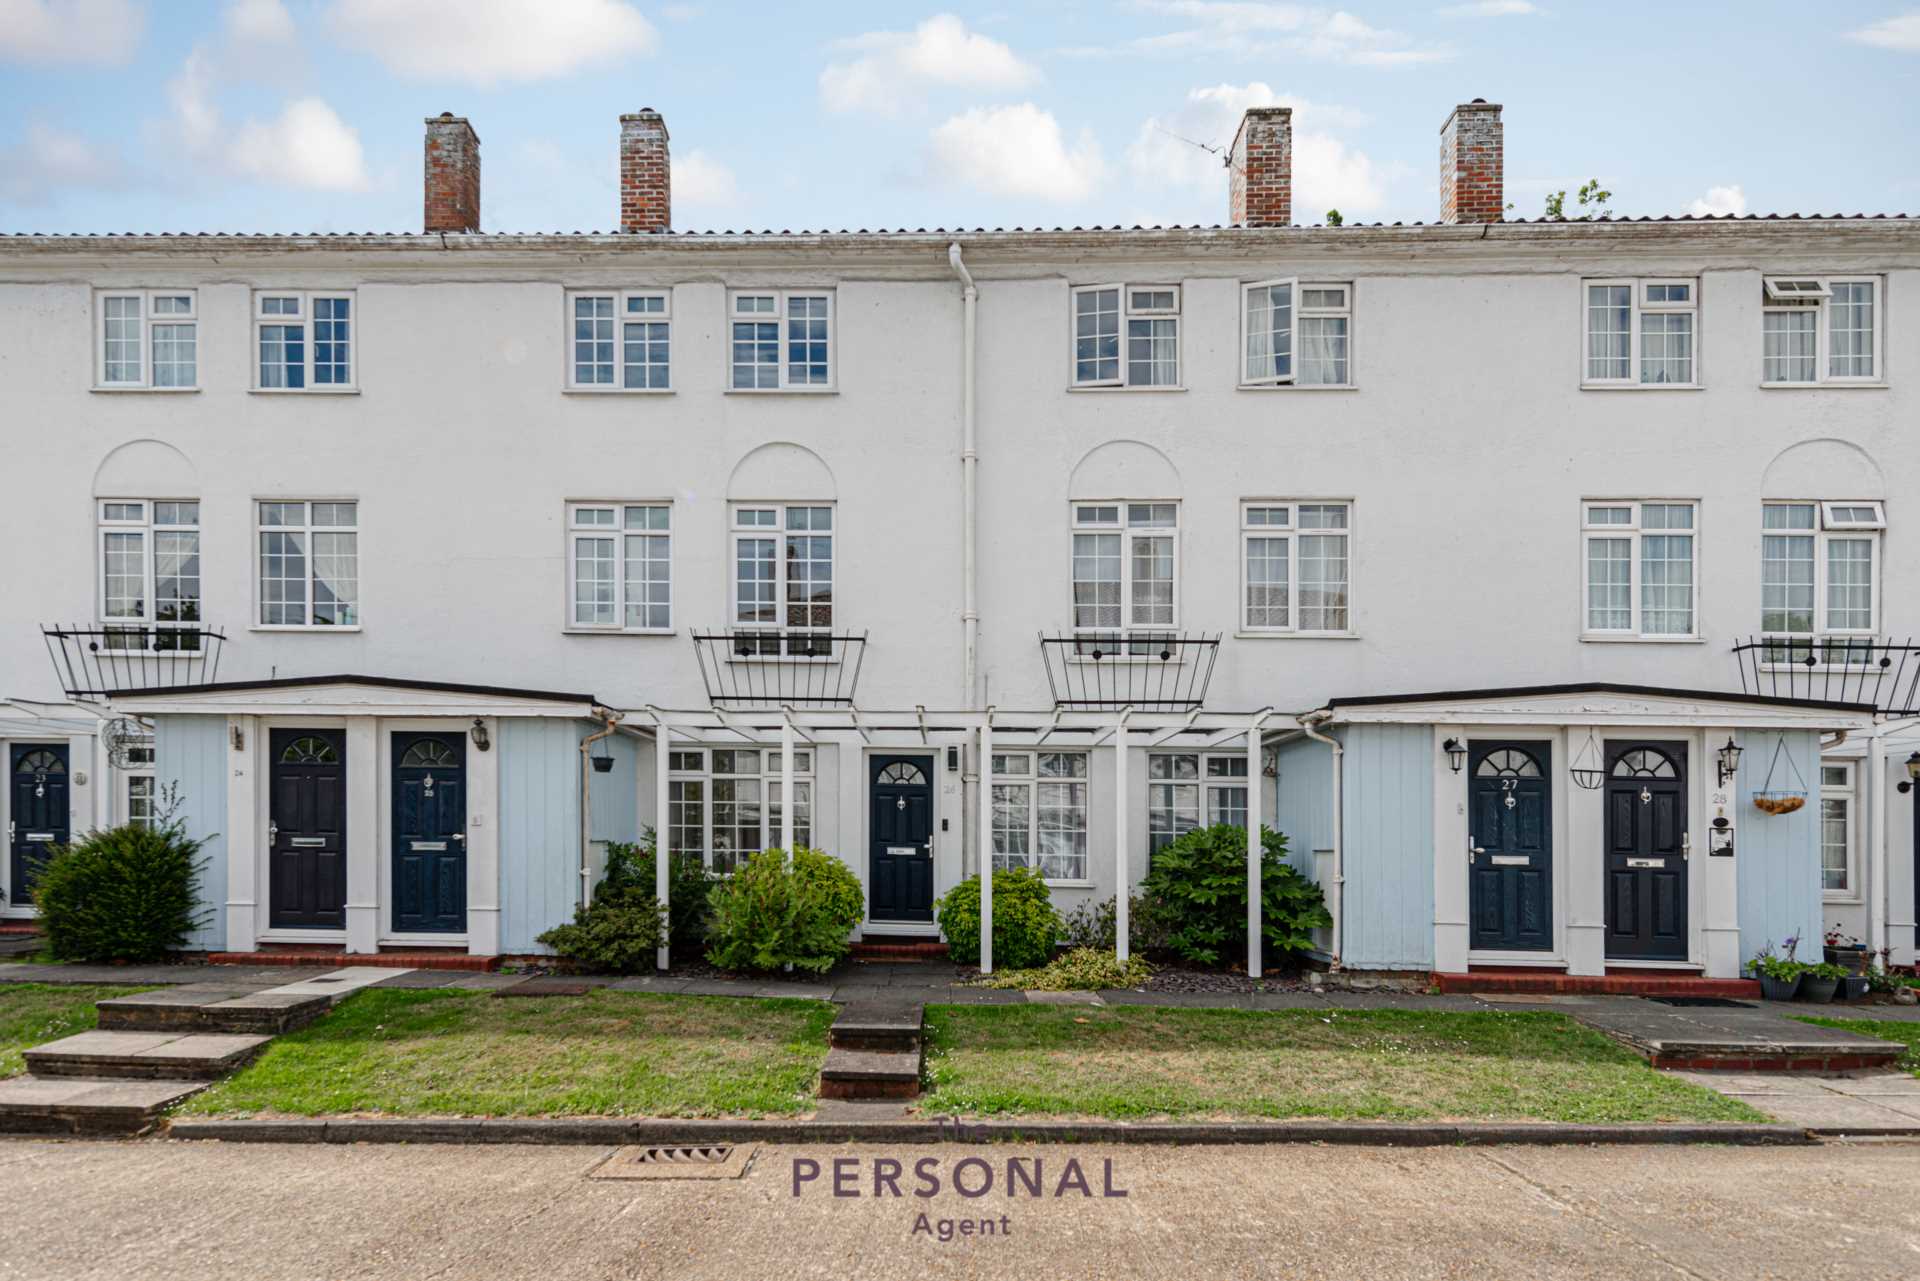 2 bed Flat for rent in Epsom. From The Personal Agent - Epsom